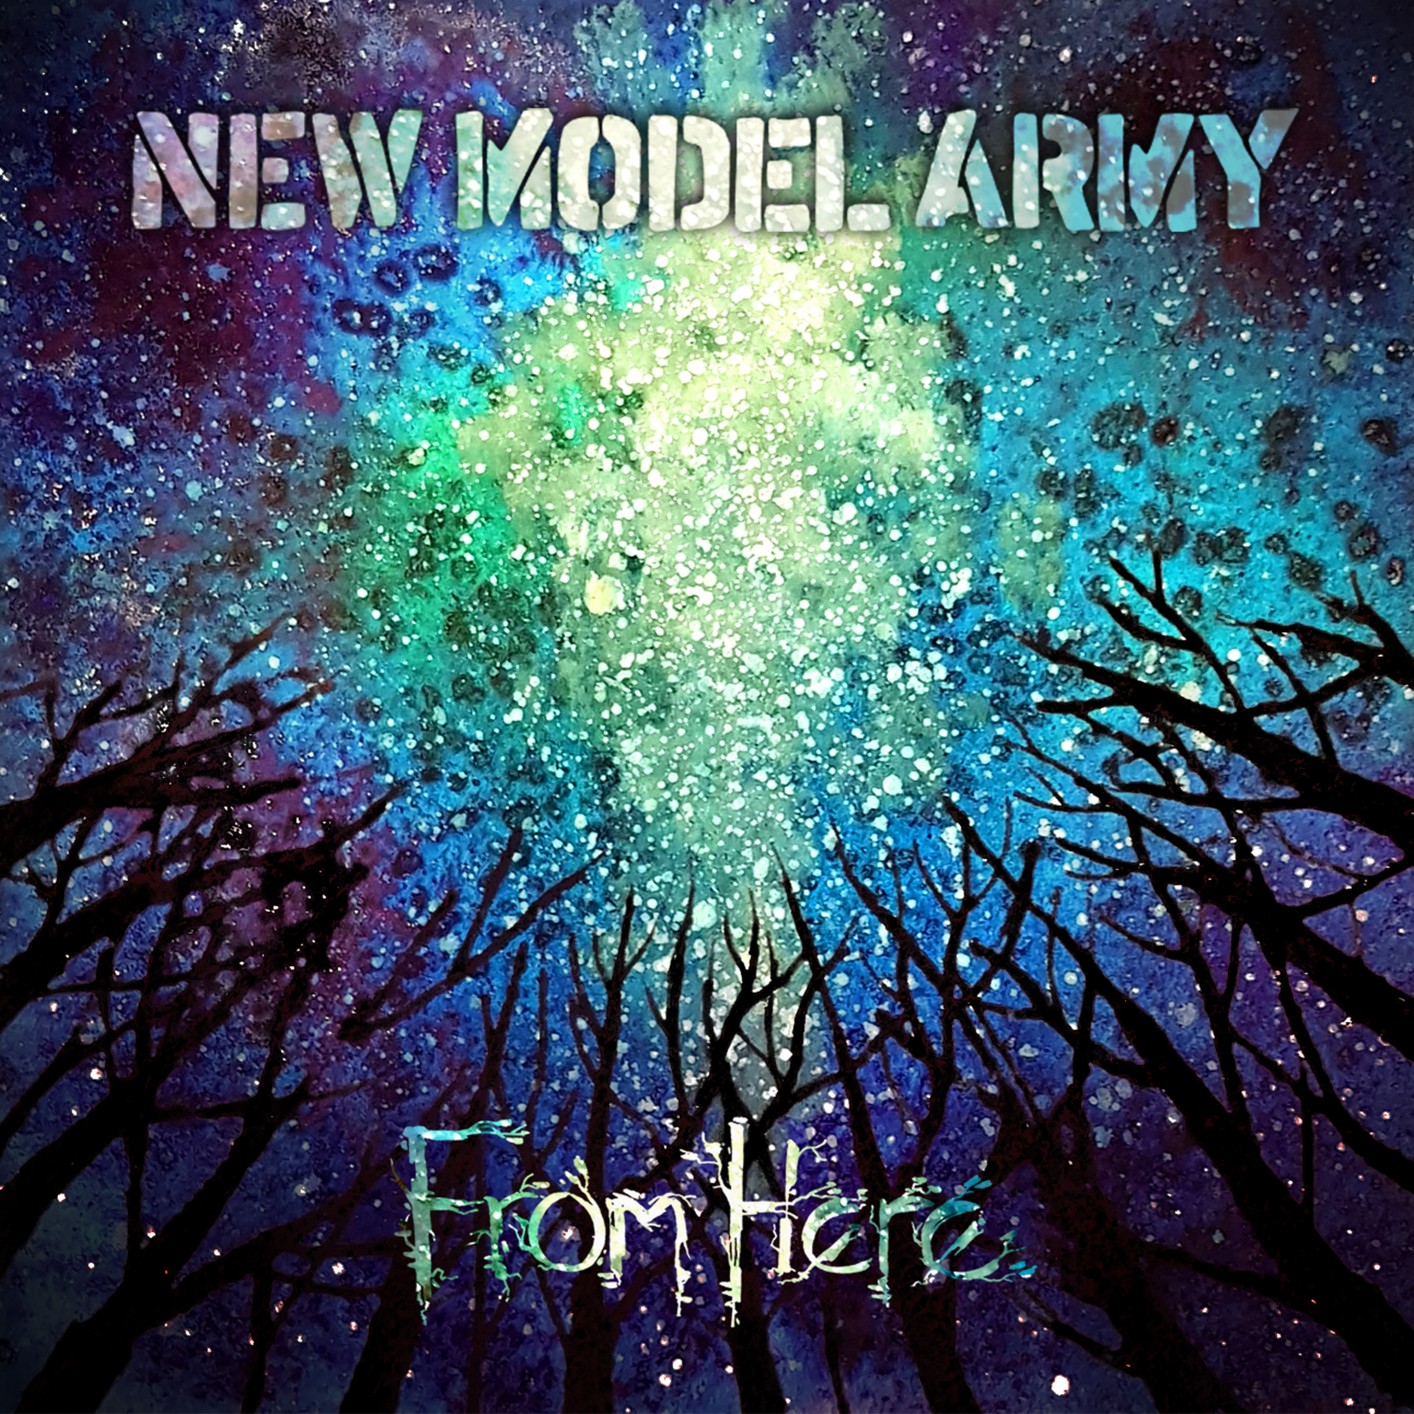 New Model Army – From Here (2019) [FLAC 24bit/48kHz]